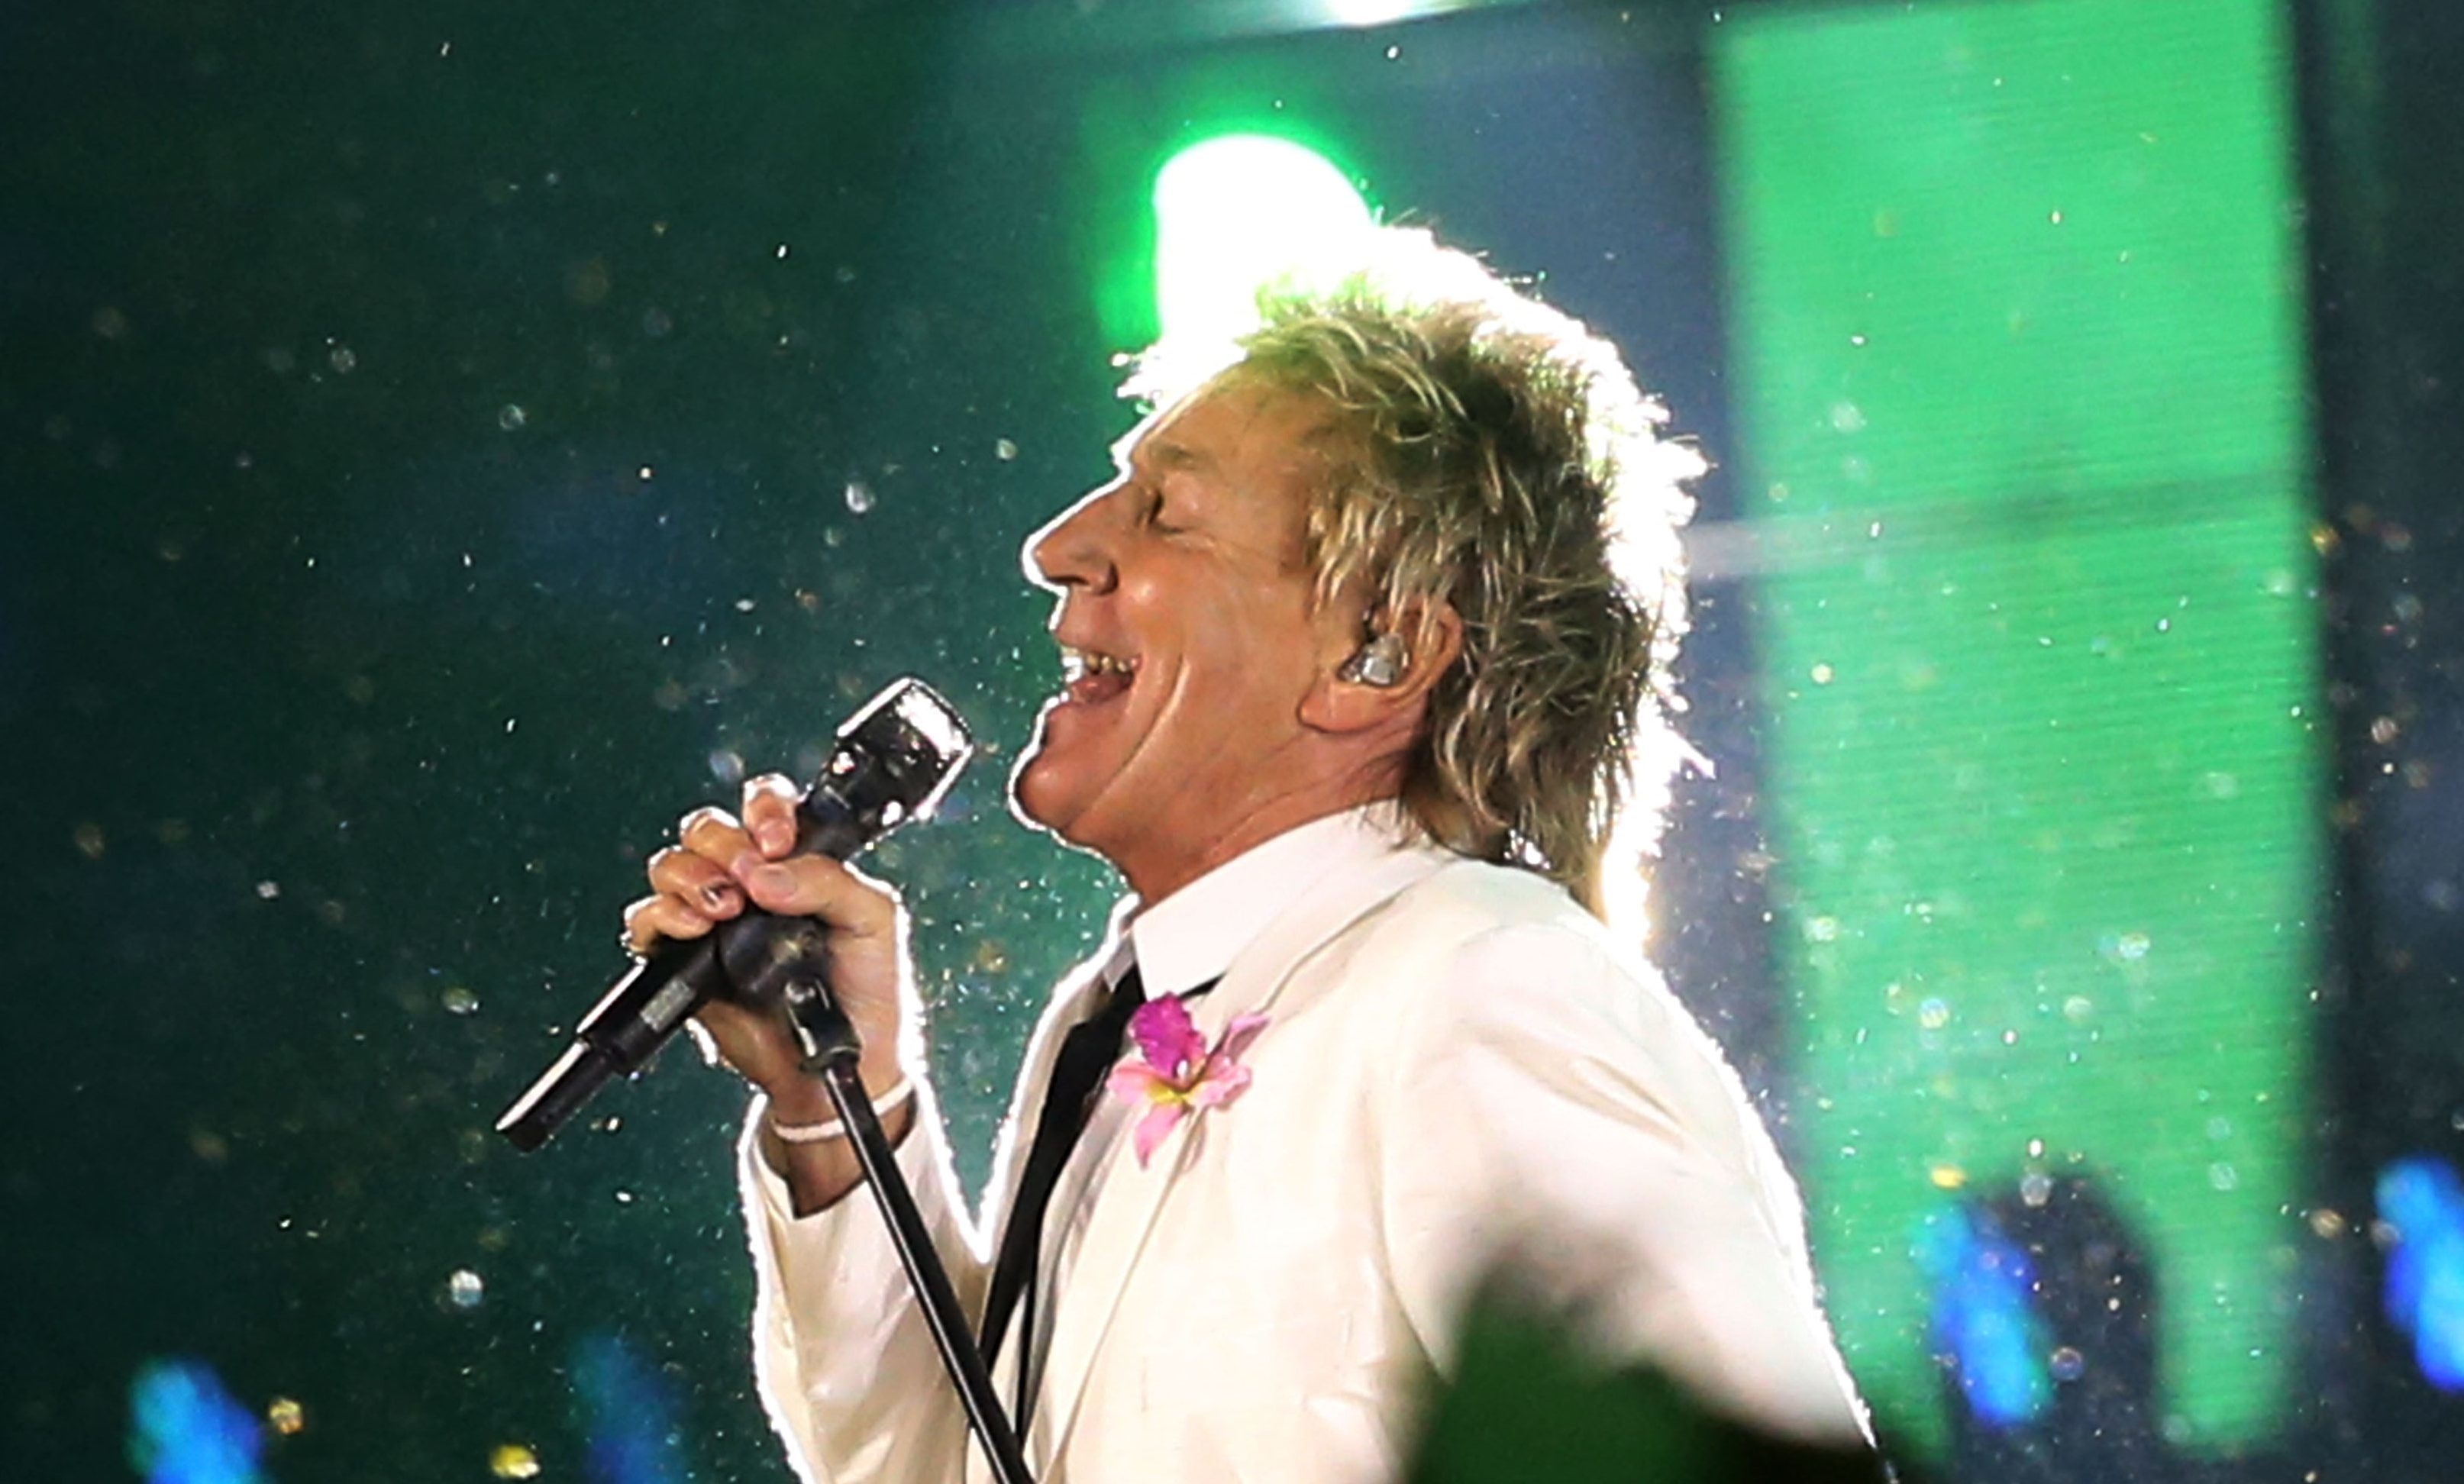 Singer Sir Rod Stewart performs during the Opening Ceremony for the Glasgow 2014 Commonwealth Games.